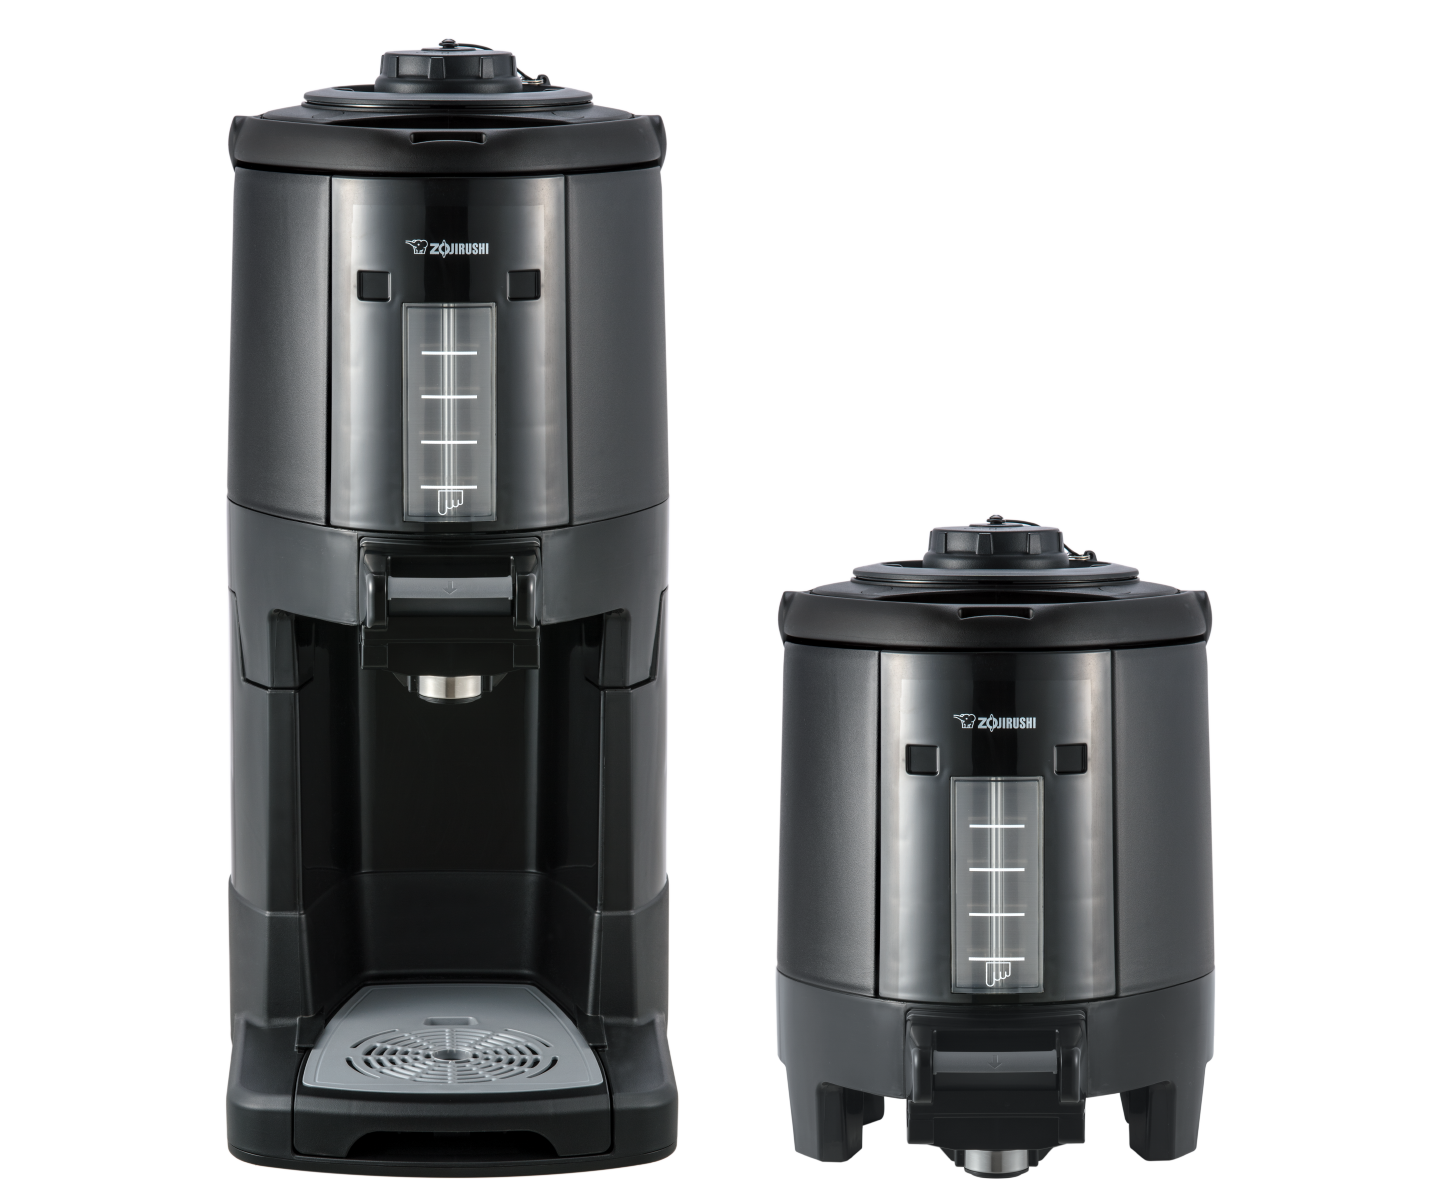 ducts Thermal Gravity Pot® Beverage Dispenser SY-BA60/60N Thermal Gravity Pot® Beverage Dispenser SY-BA60/60N